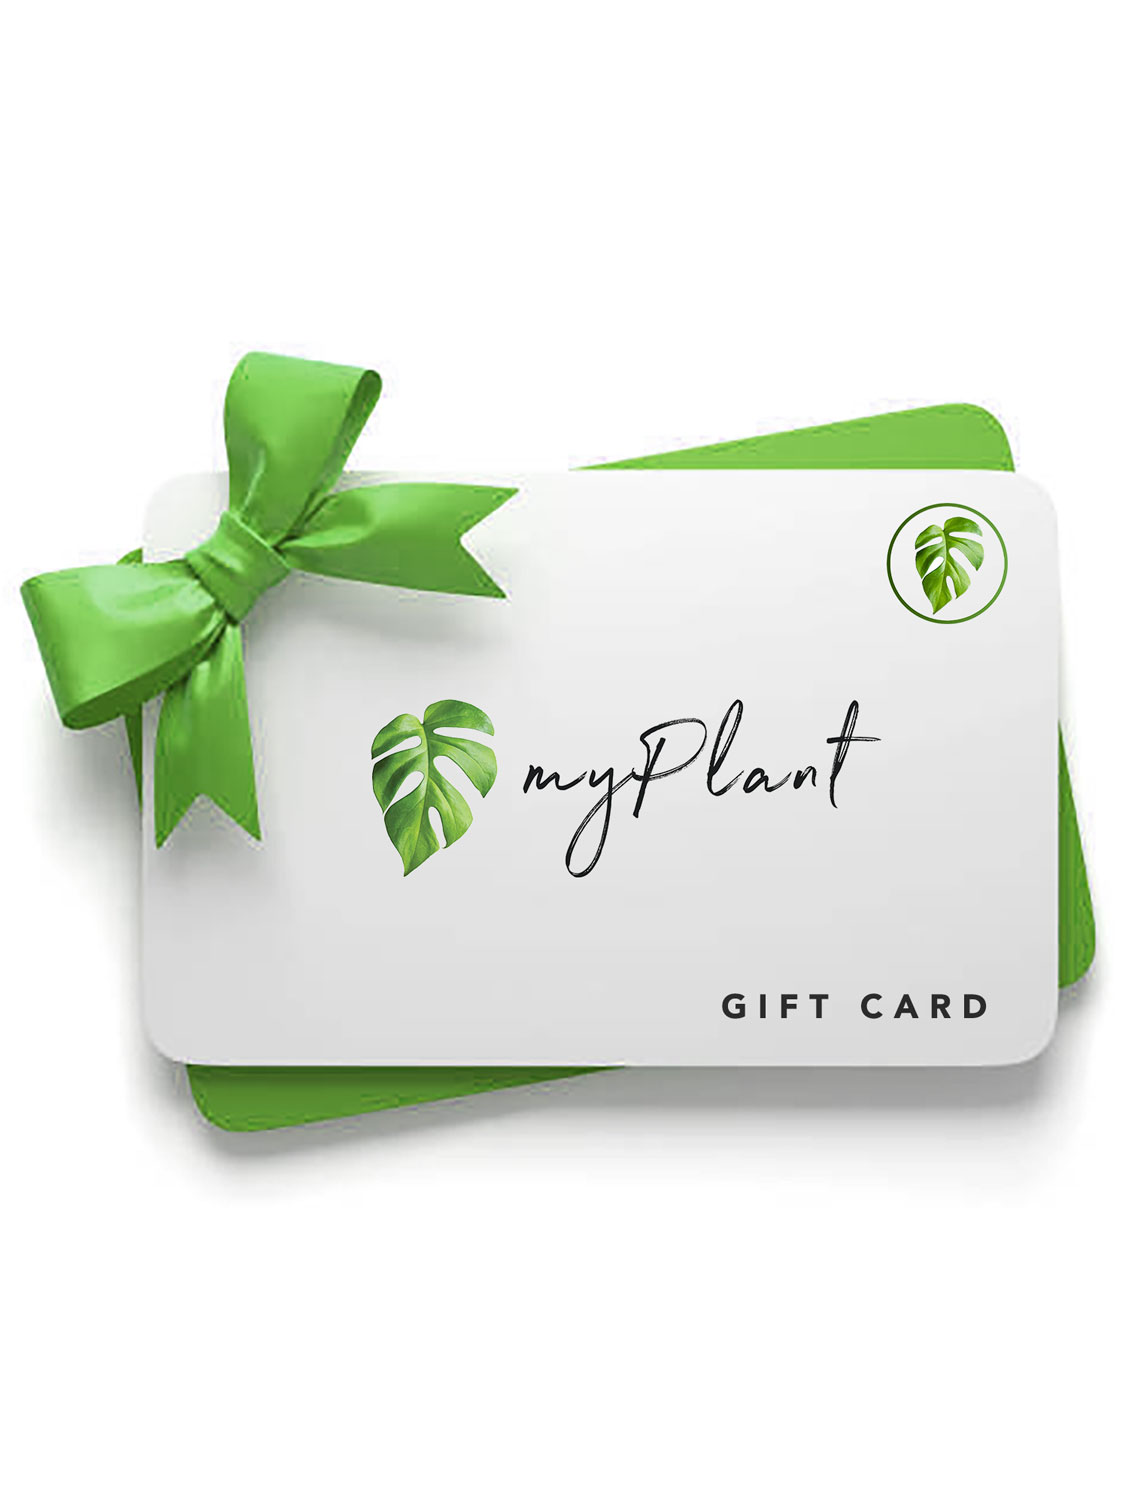 Rare plants gift card from MyPlant